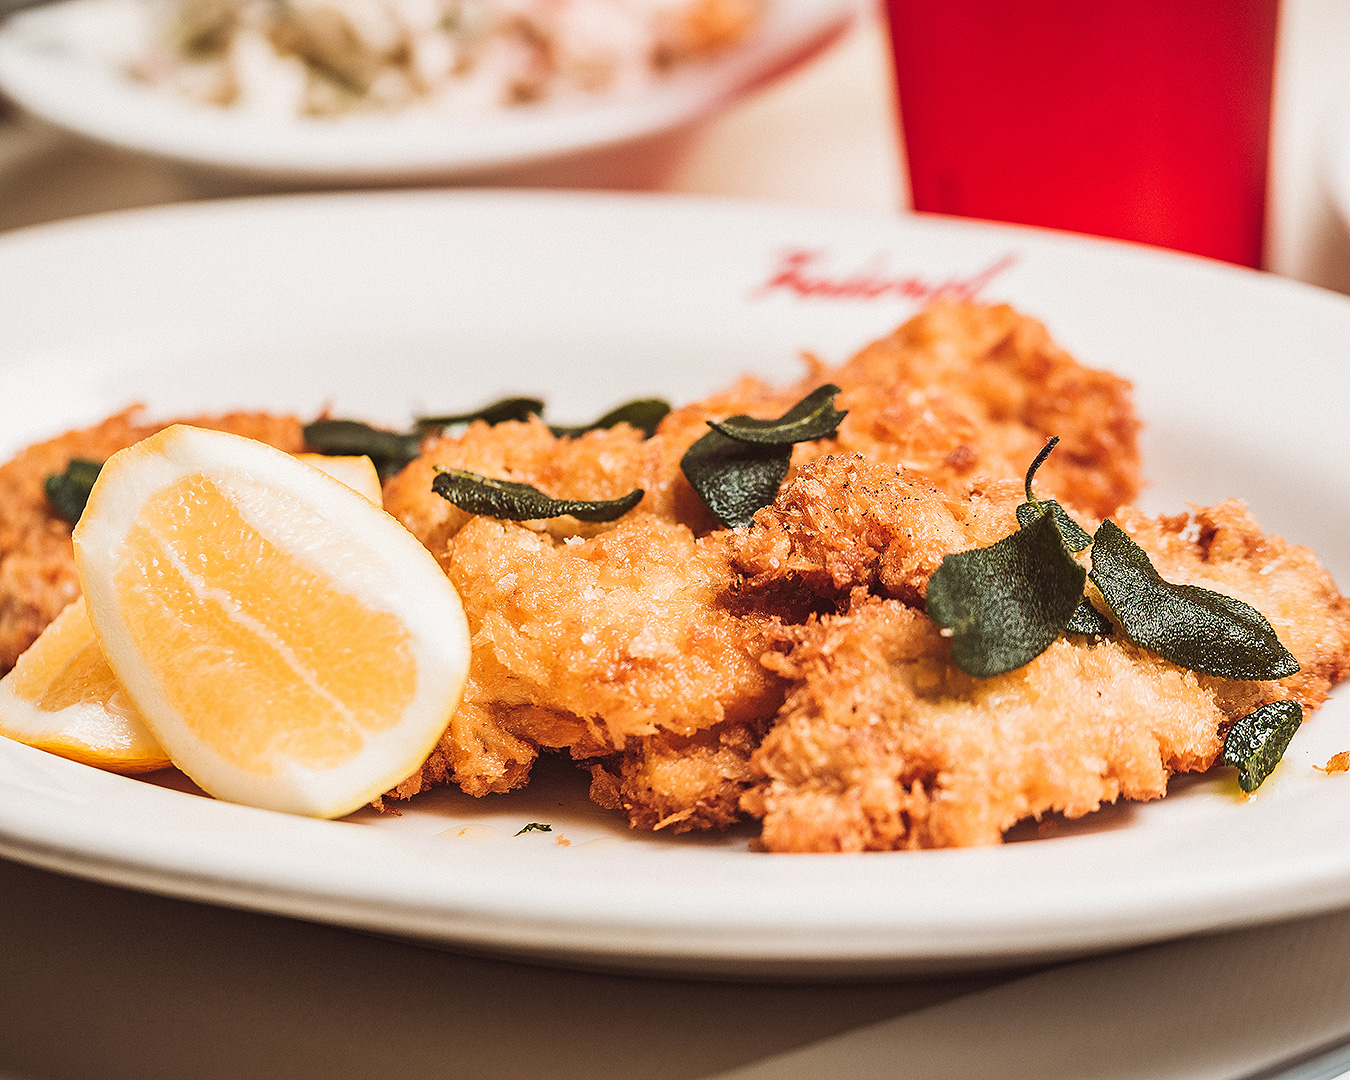 A delicious looking schnitzel from Federal Delicatessen sitting on a plate with crispy sage leaves on top and a slice of lemon. One of the best schnitzels in Auckland.